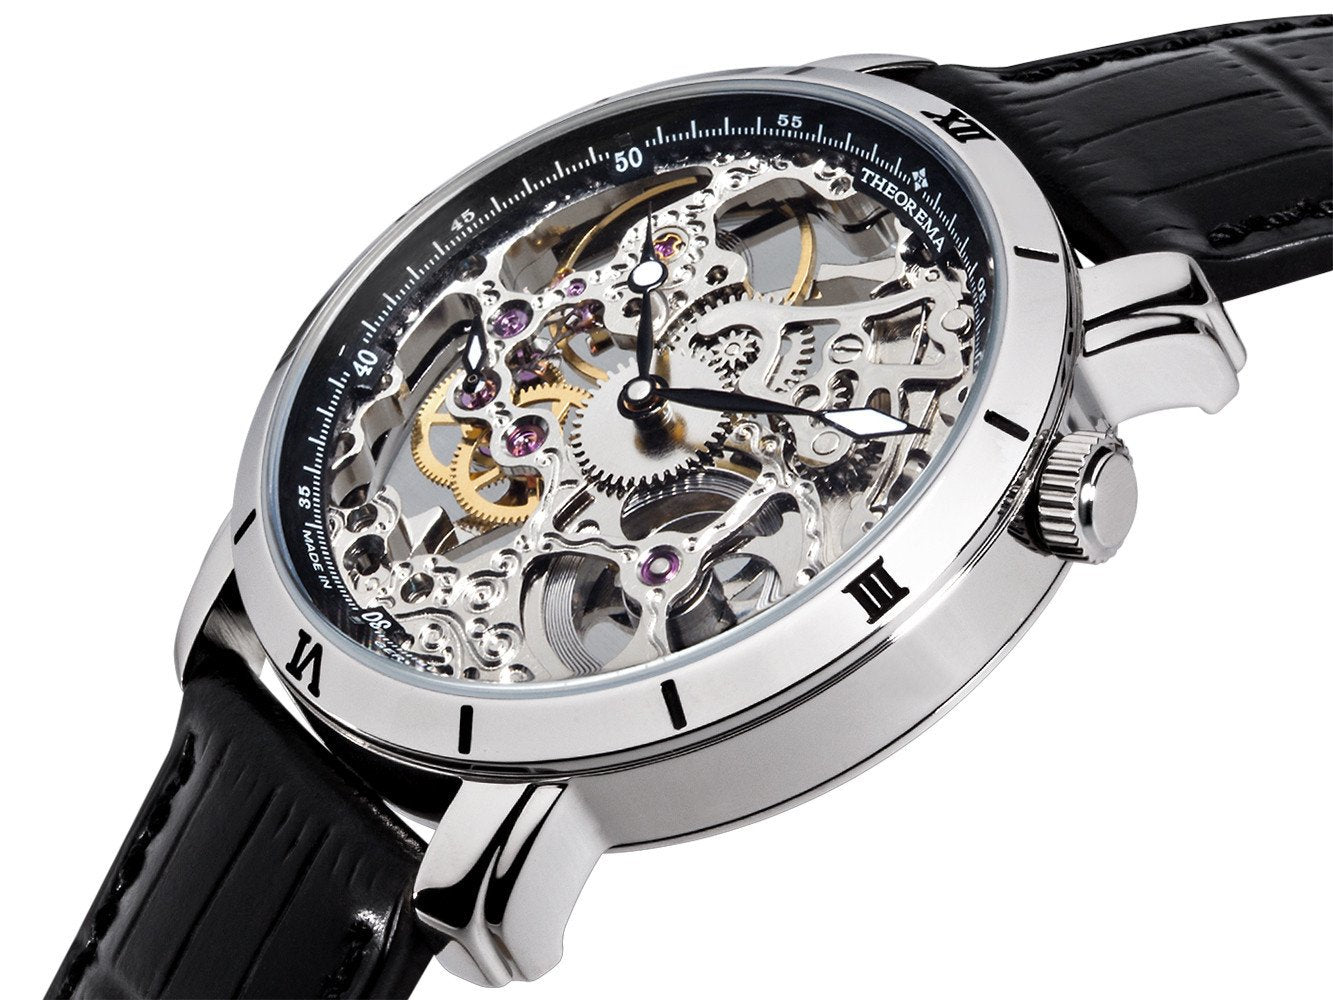 See-through skeletonized dial with silver case and black leather band.